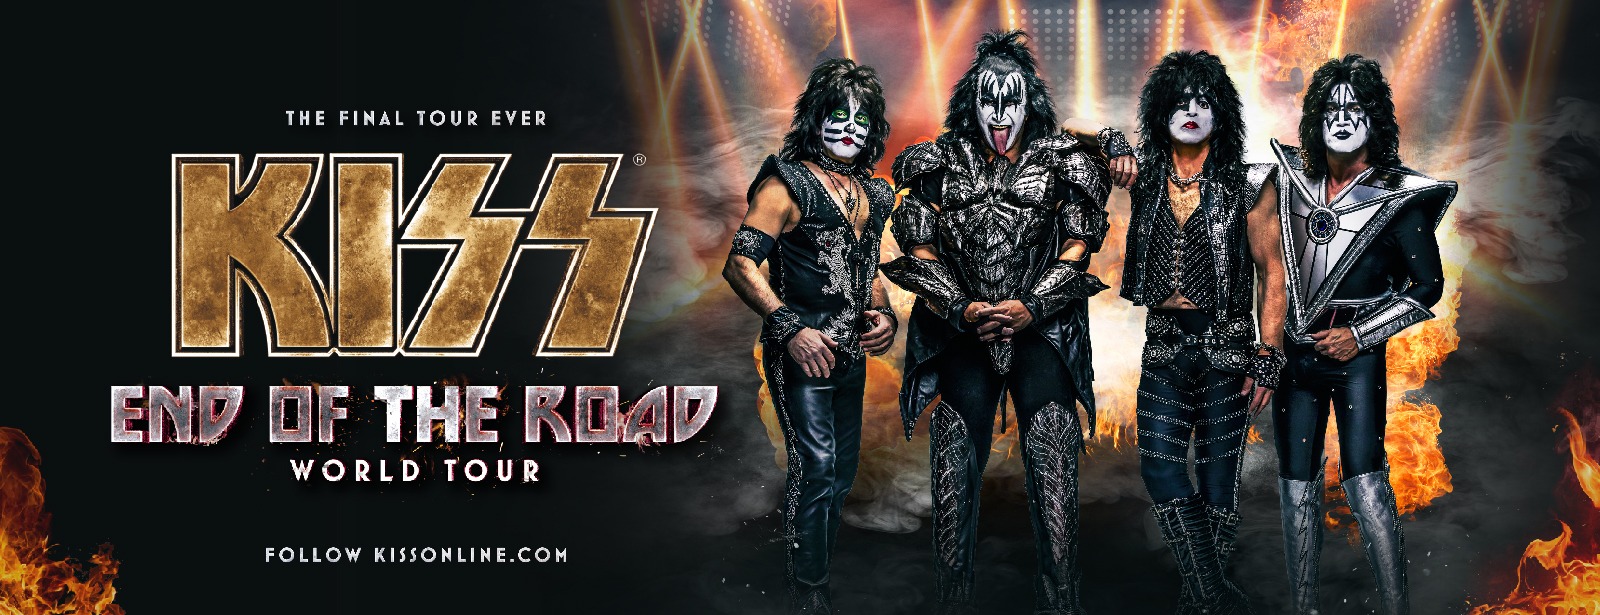 Kiss Live Concert in Coca-Cola Arena - Coming Soon in UAE